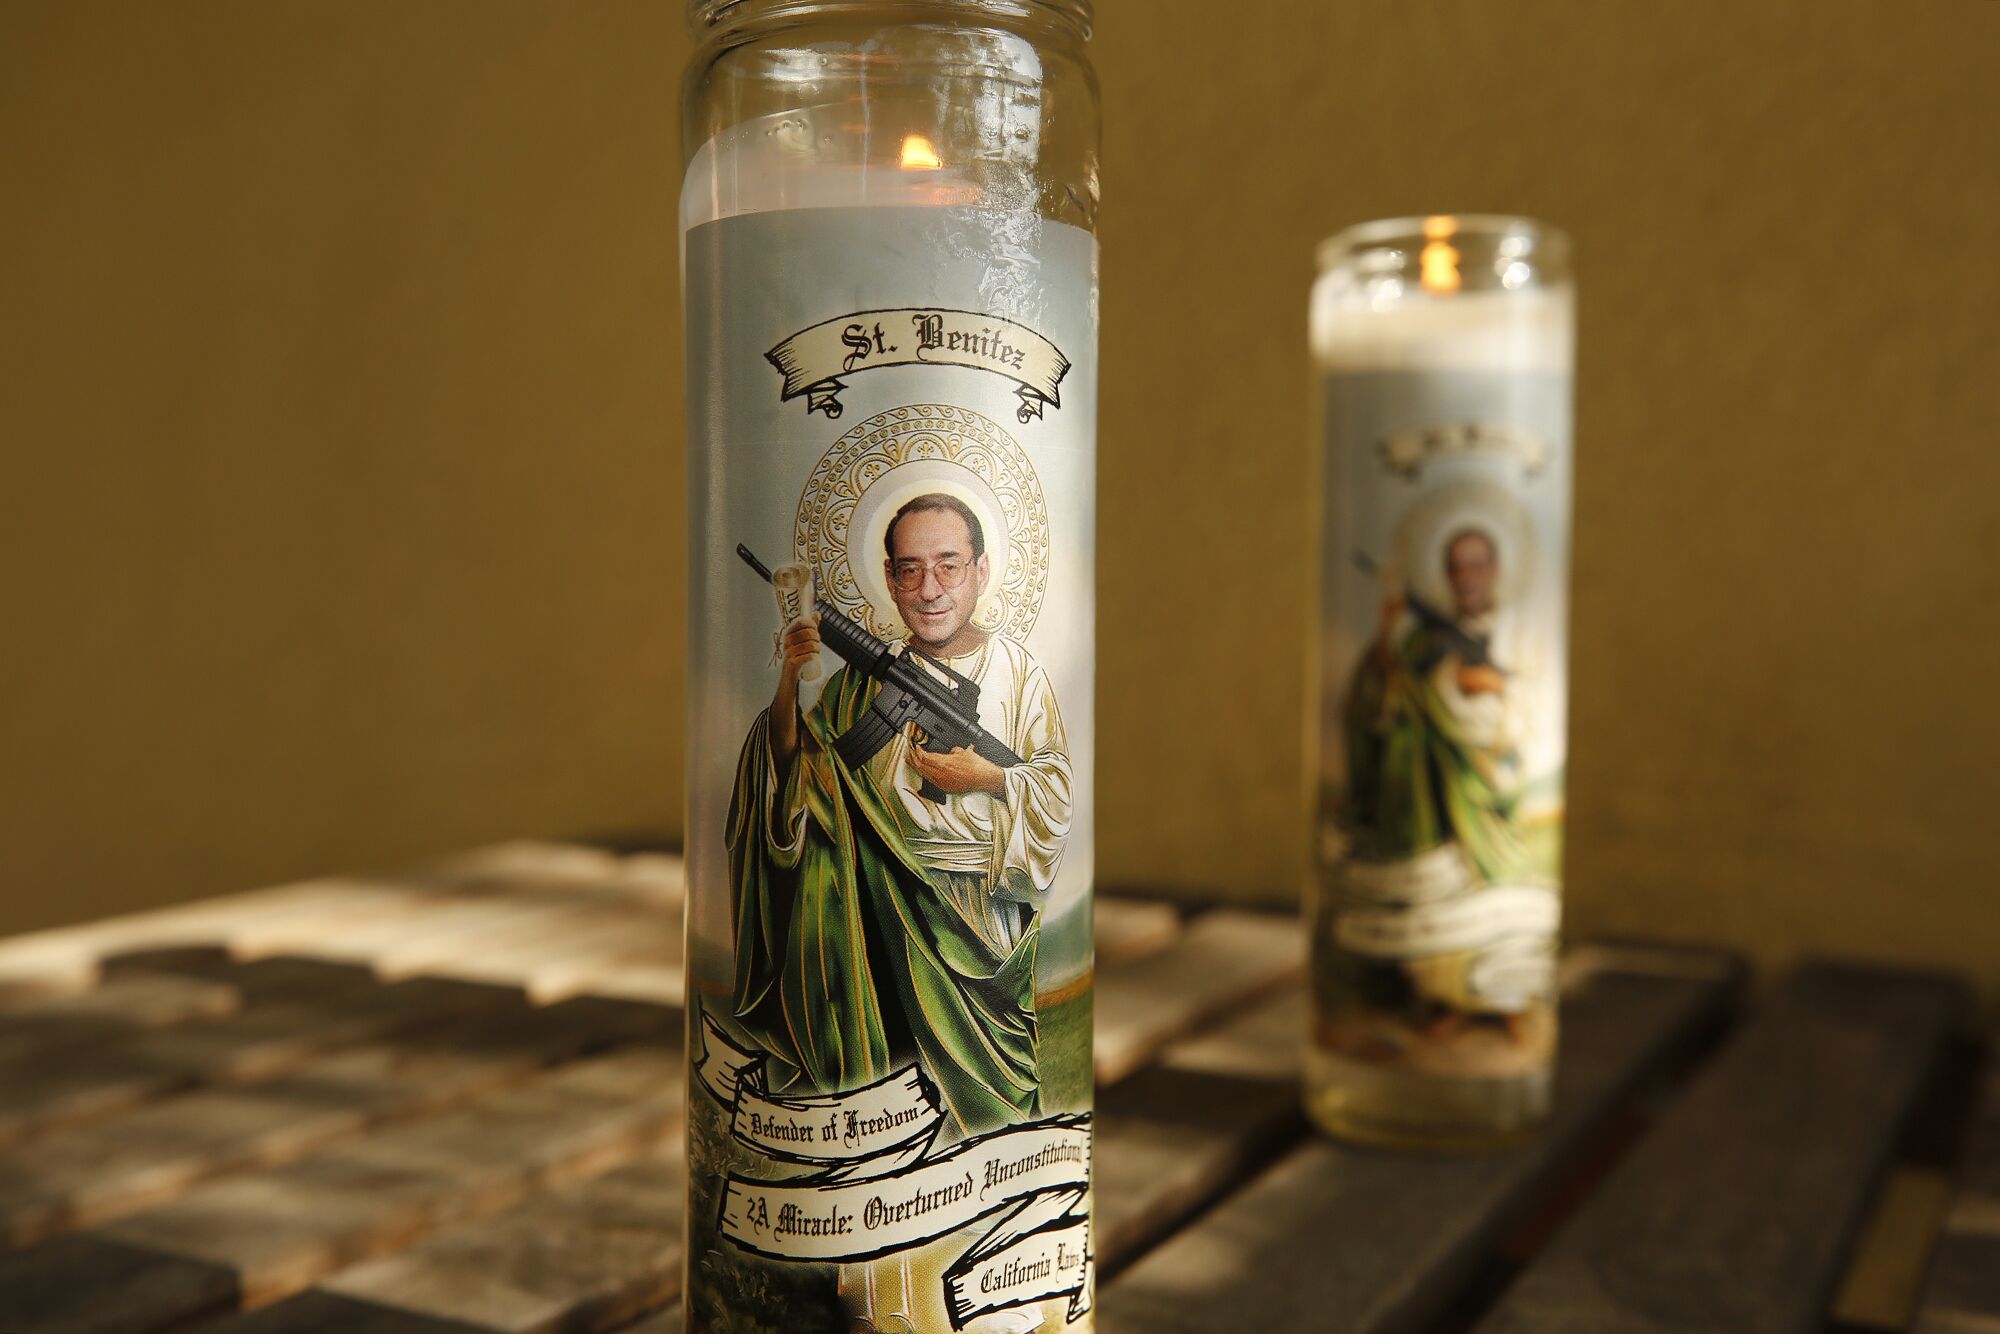 Prayer candles available online contain an image of federal judge Roger Benitez.